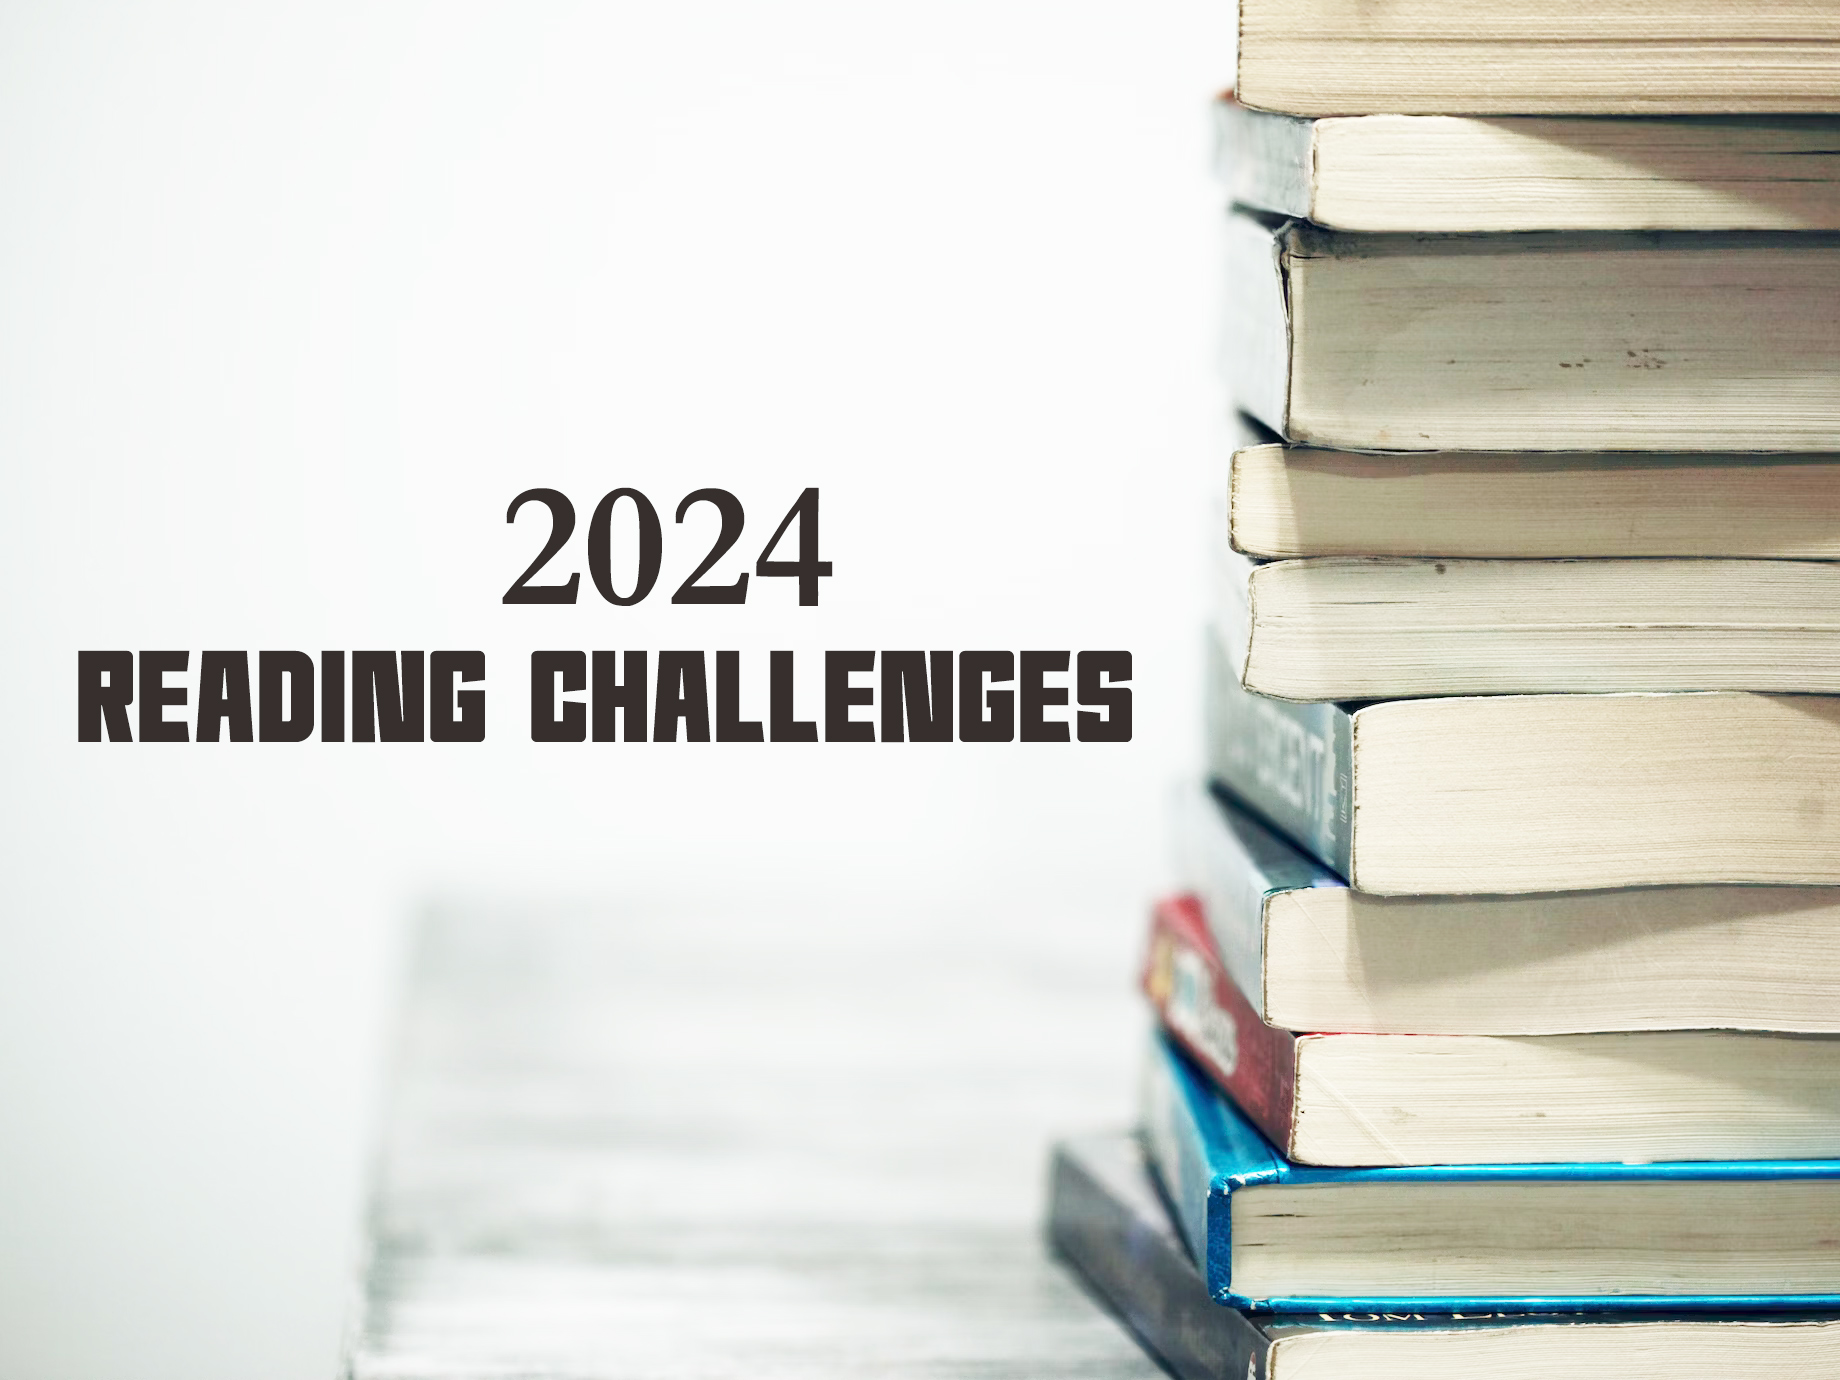 2024 reading challenges list